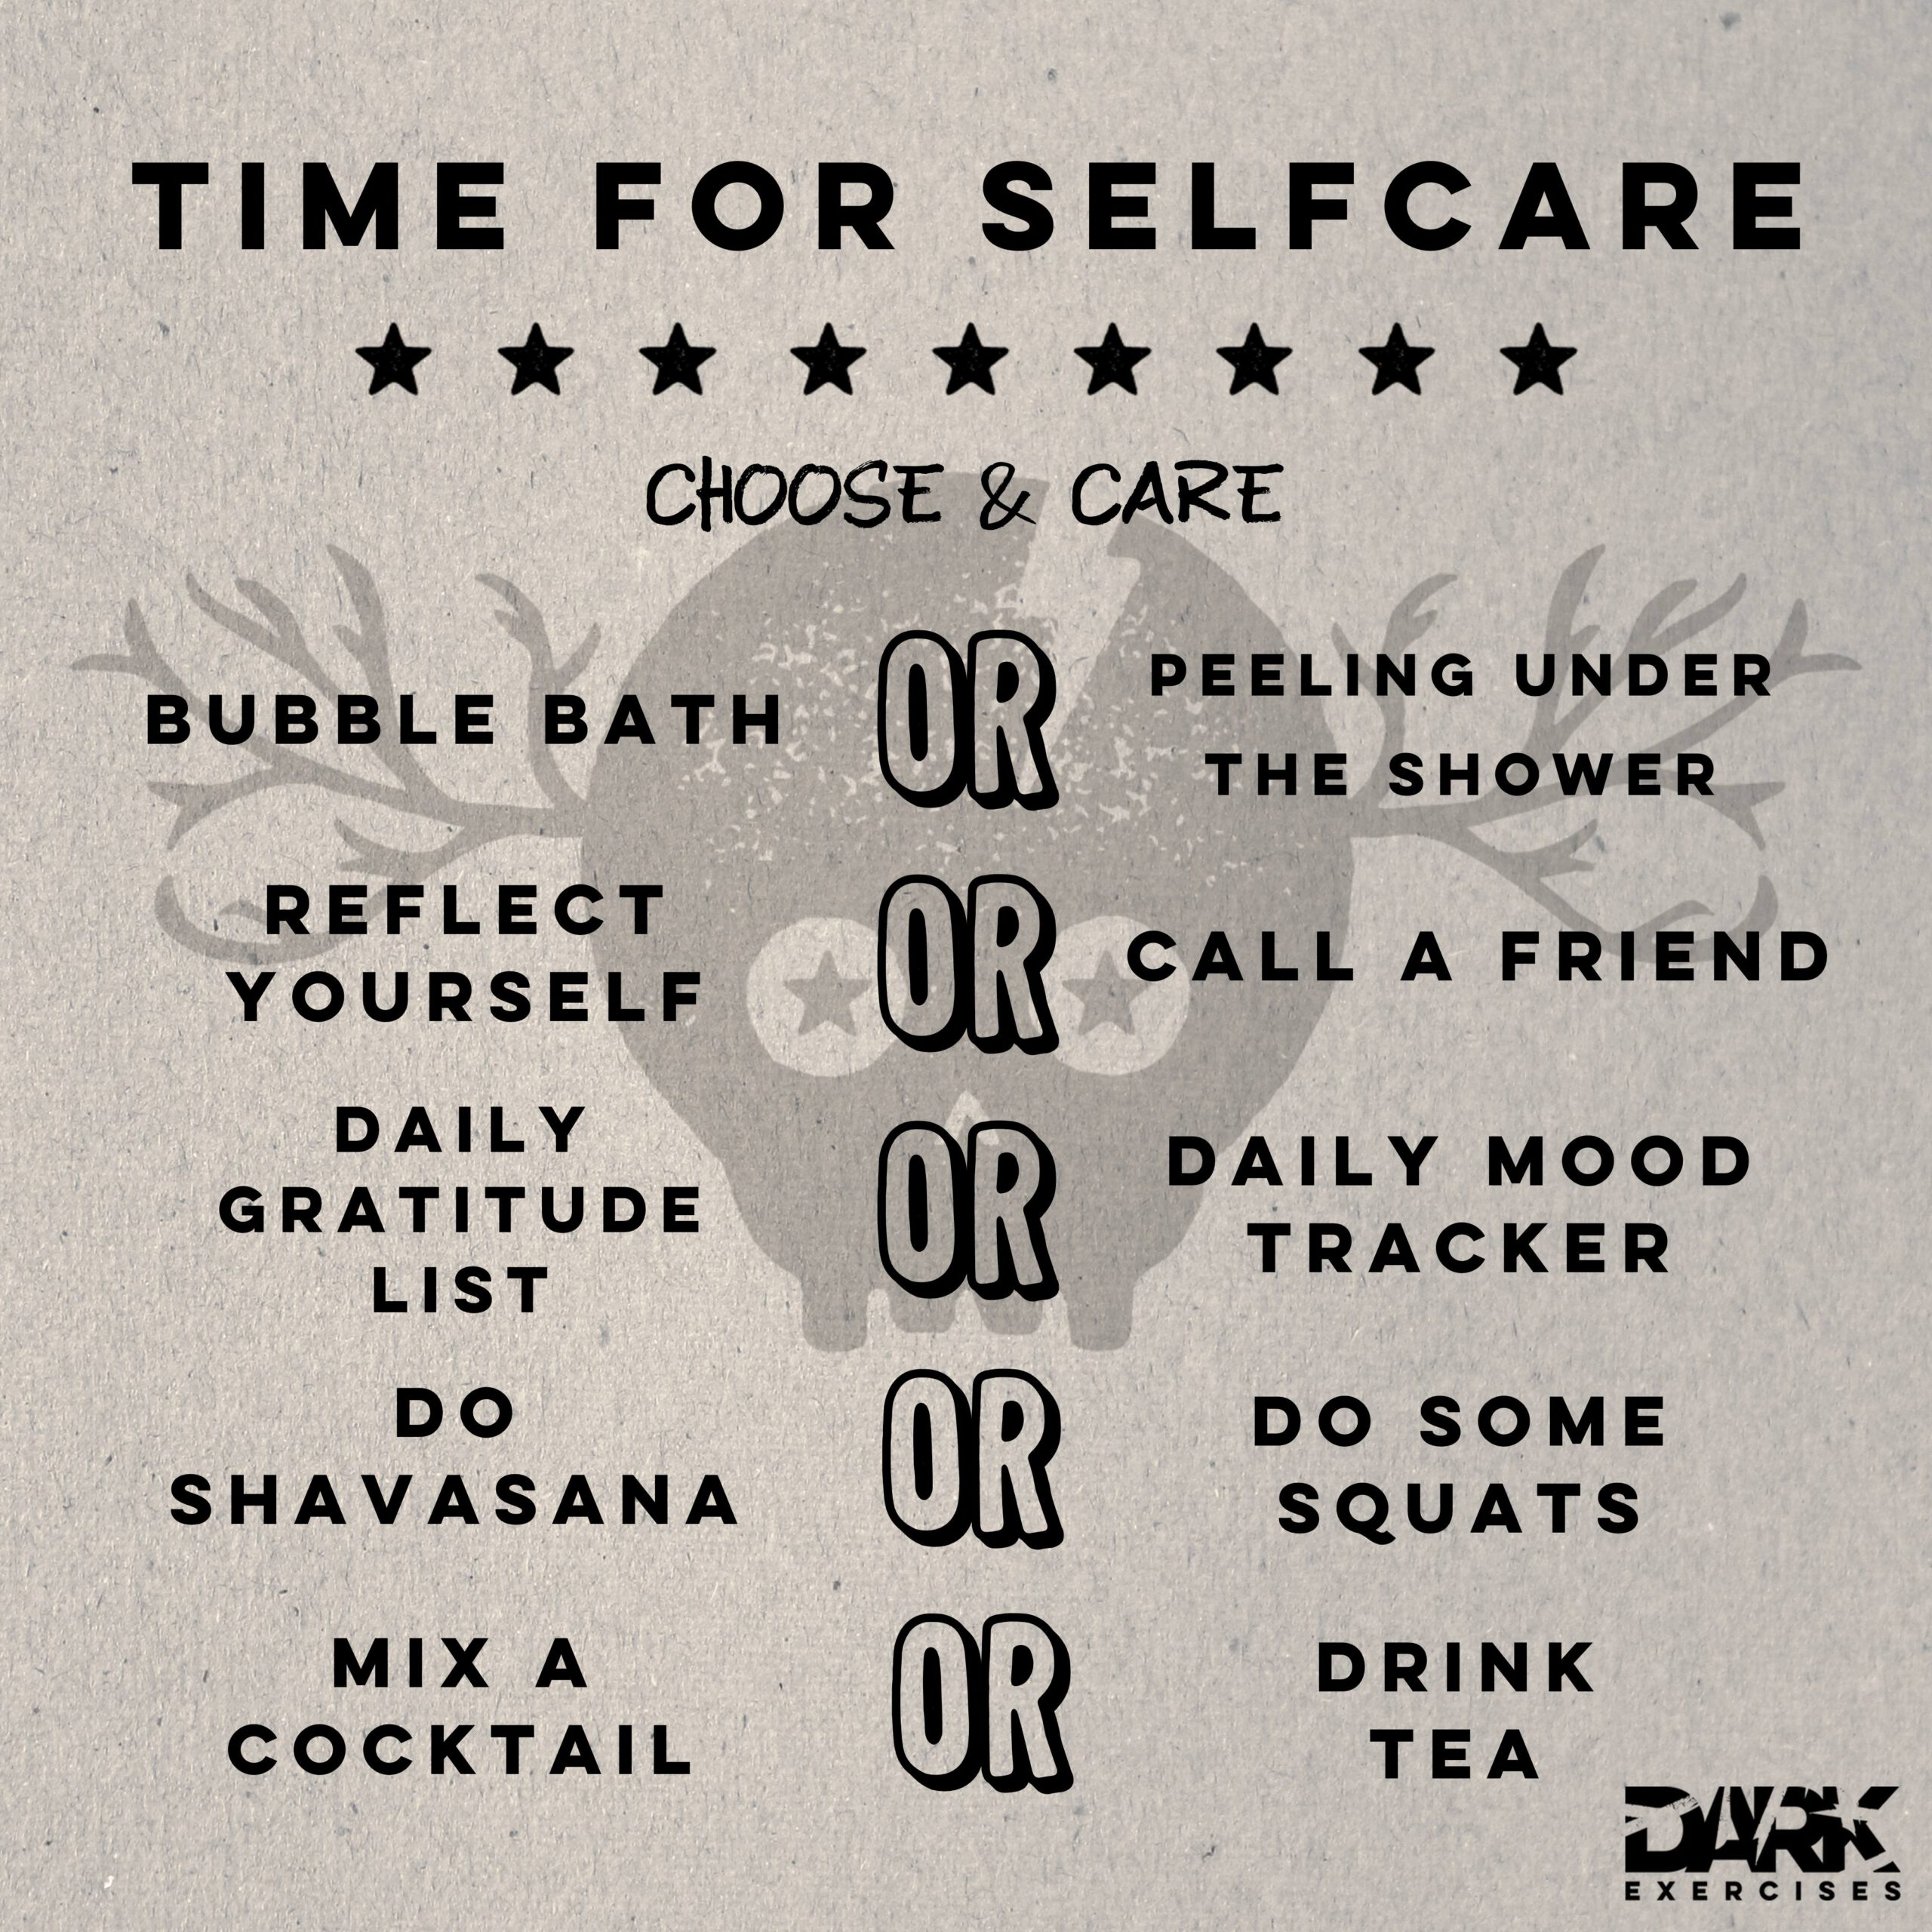 Happiness 
Time for Selicare